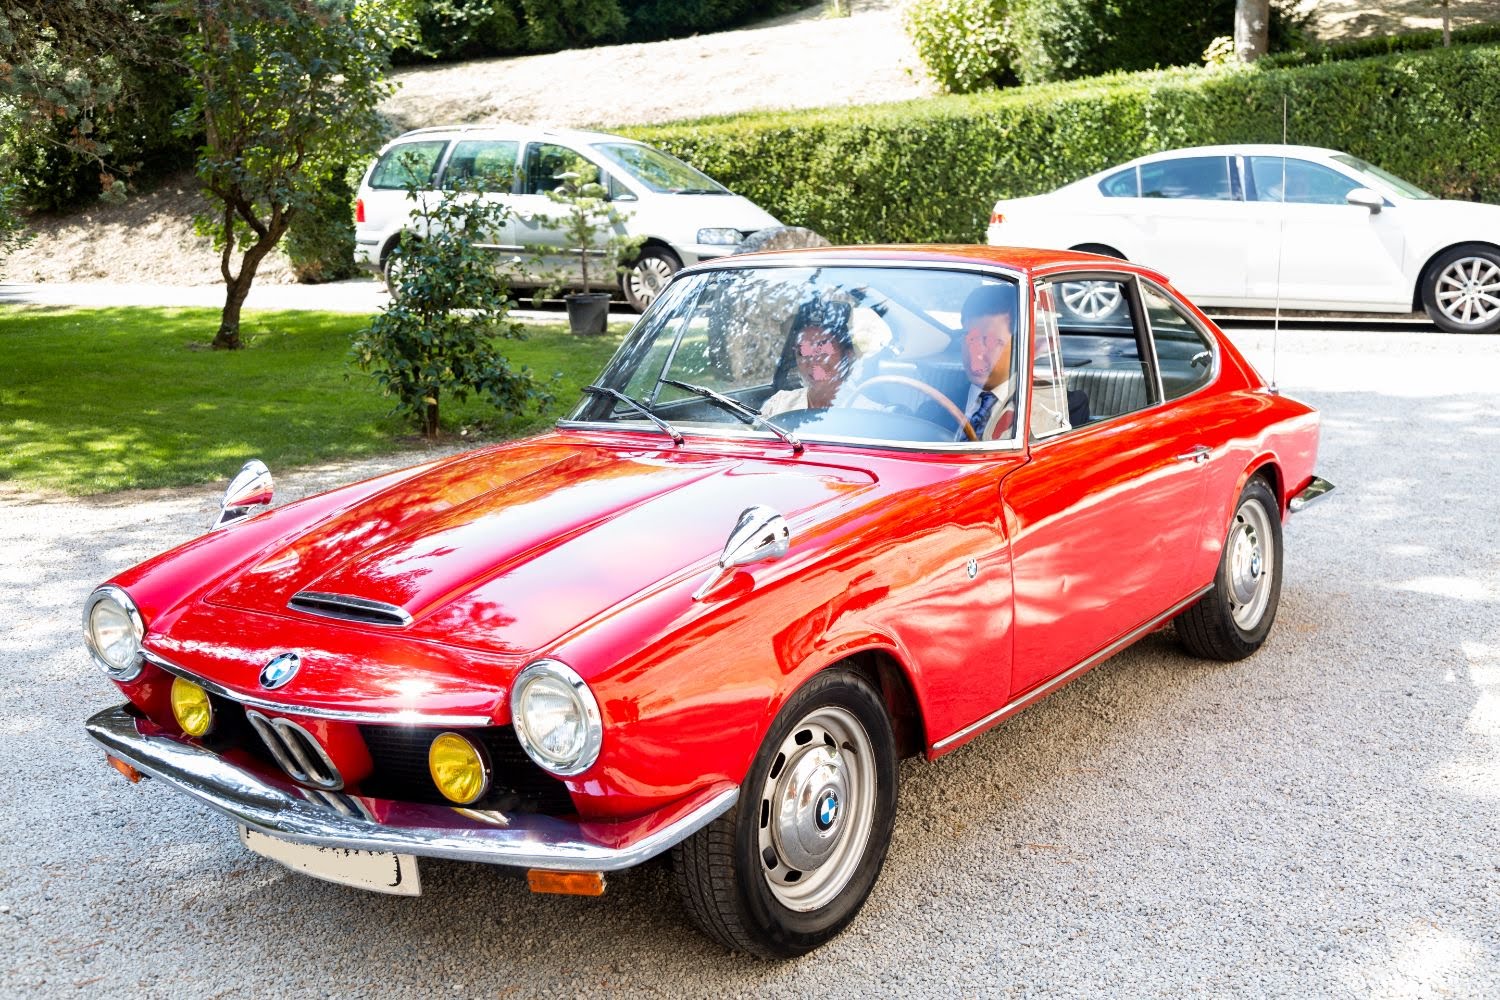 BMW 1600 glas GT 70,000 kms Collection NorClassics